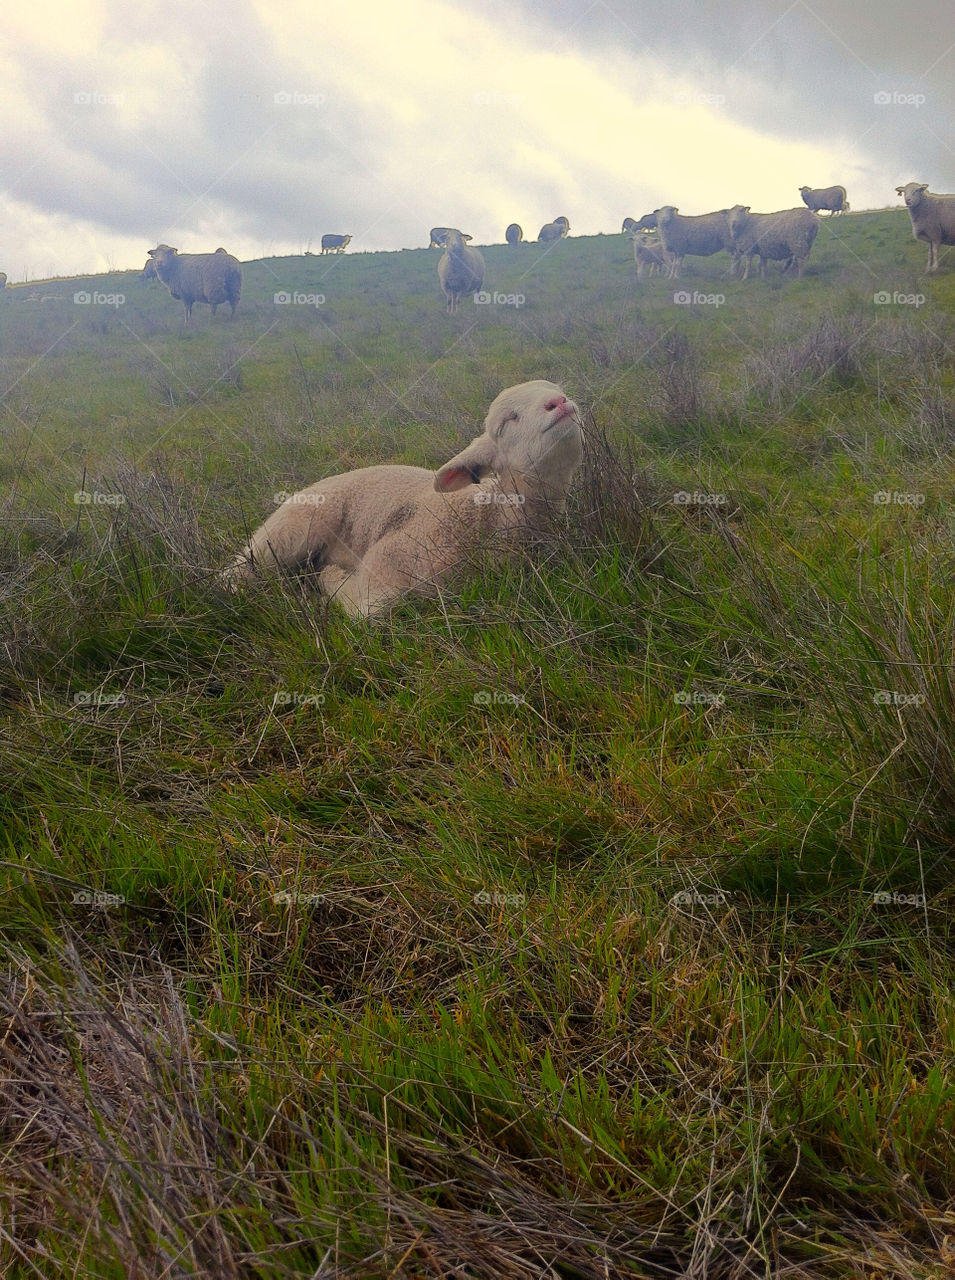 Lamb napping in the grass